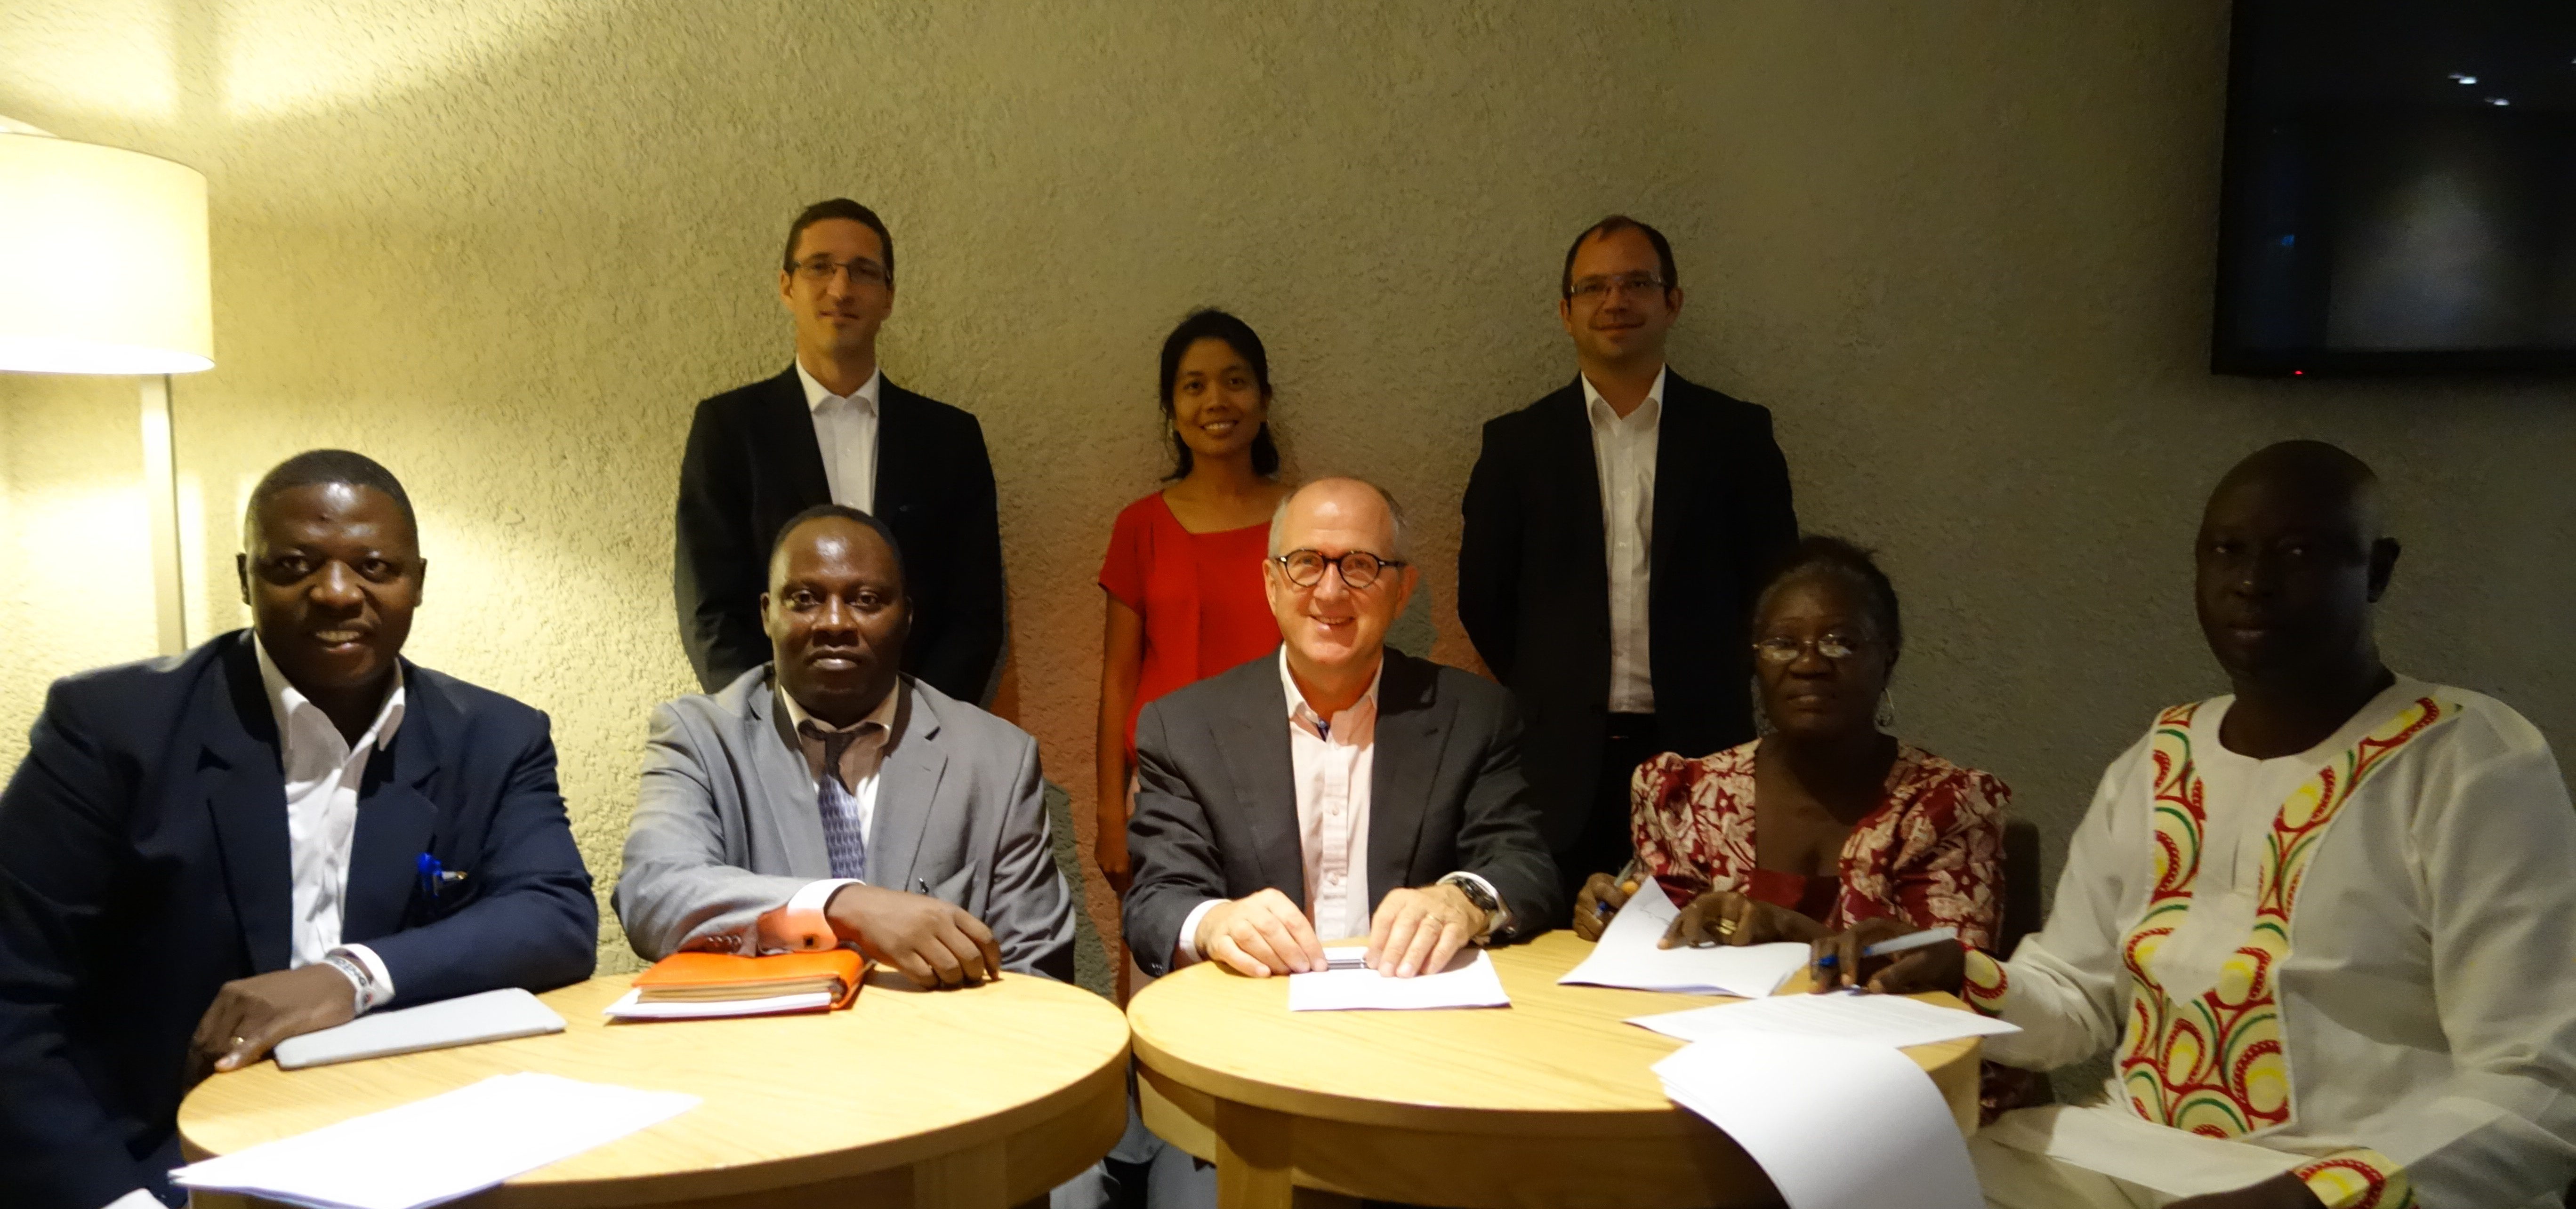 Aurora signs loan agreements with two microfinance companies in Freetown.